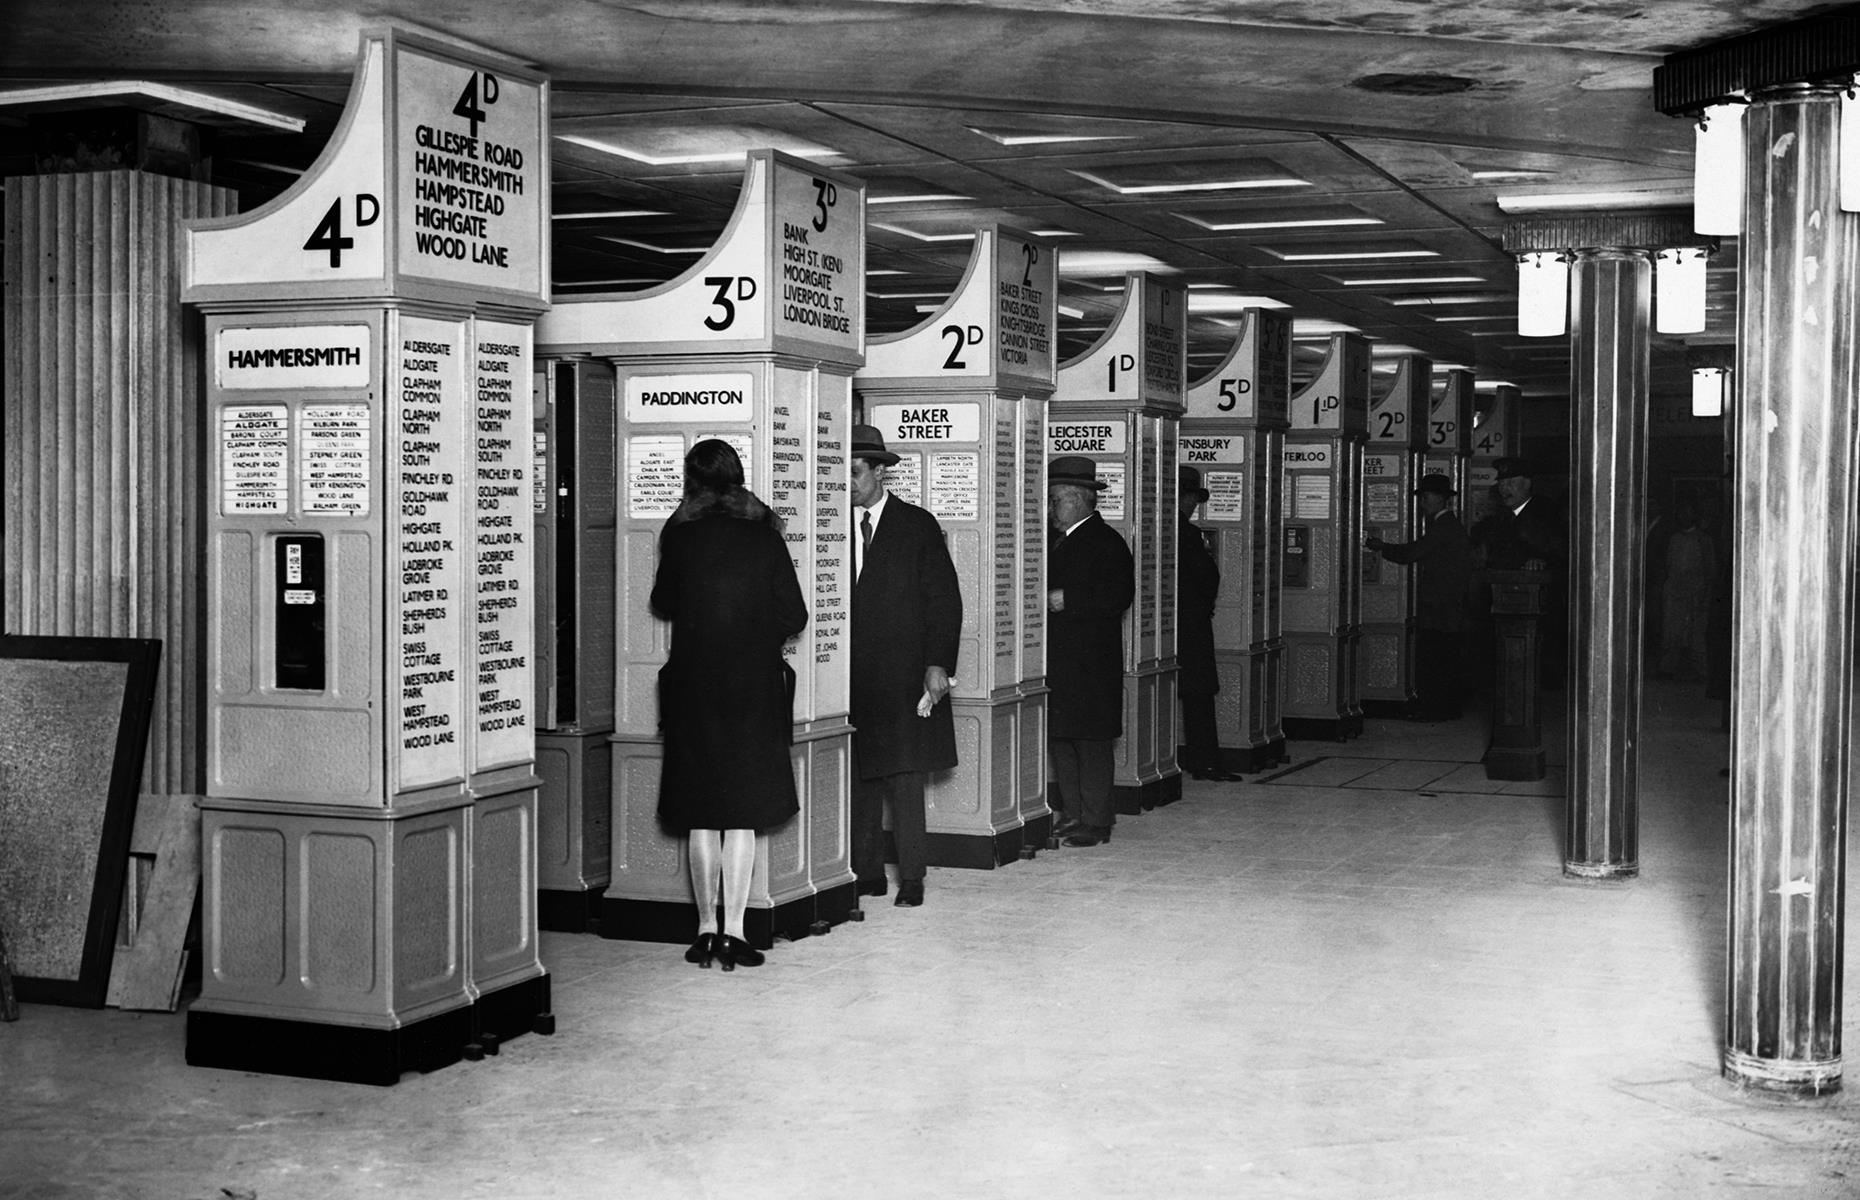 By the 1920s, more automated ticket stations were springing up across the network. Although they were state-of-the-art at the time, these vintage systems look pretty clunky to modern-day travelers. Passengers are shot here collecting tickets at Piccadilly, shortly after the station was expanded in 1928.